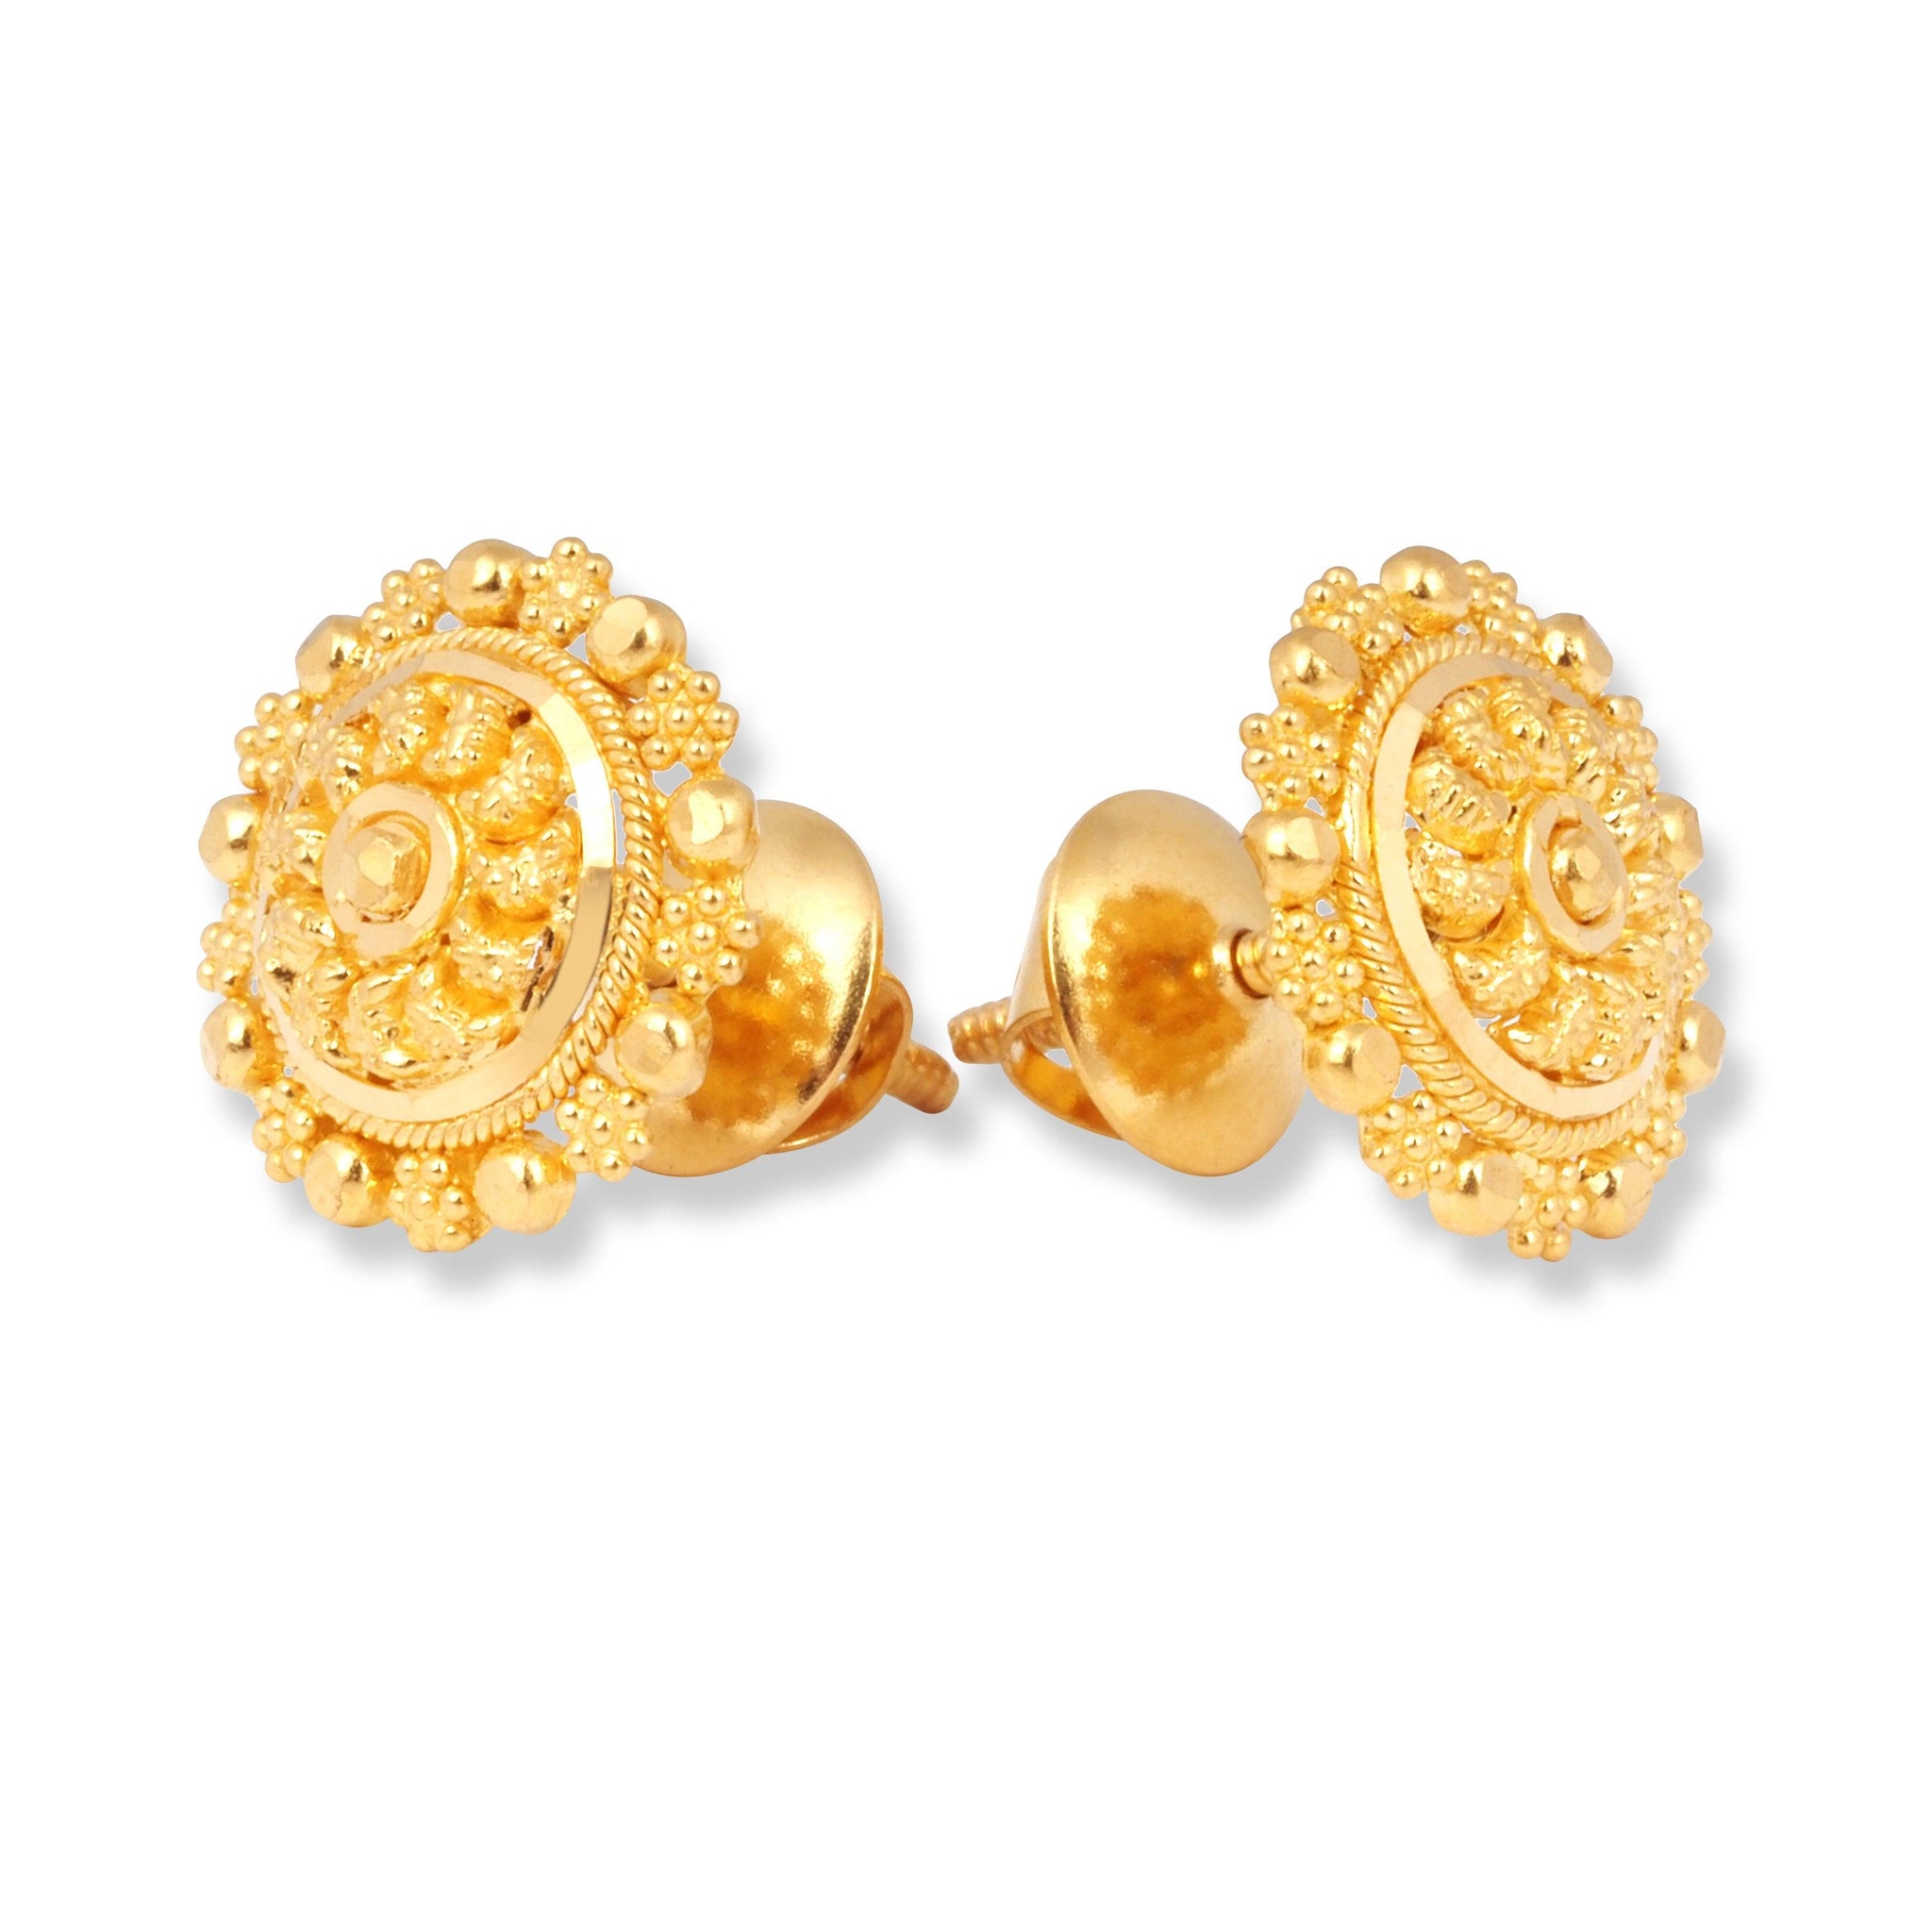 22ct Gold Earrings with Filigree Design (3.4g) E-7885